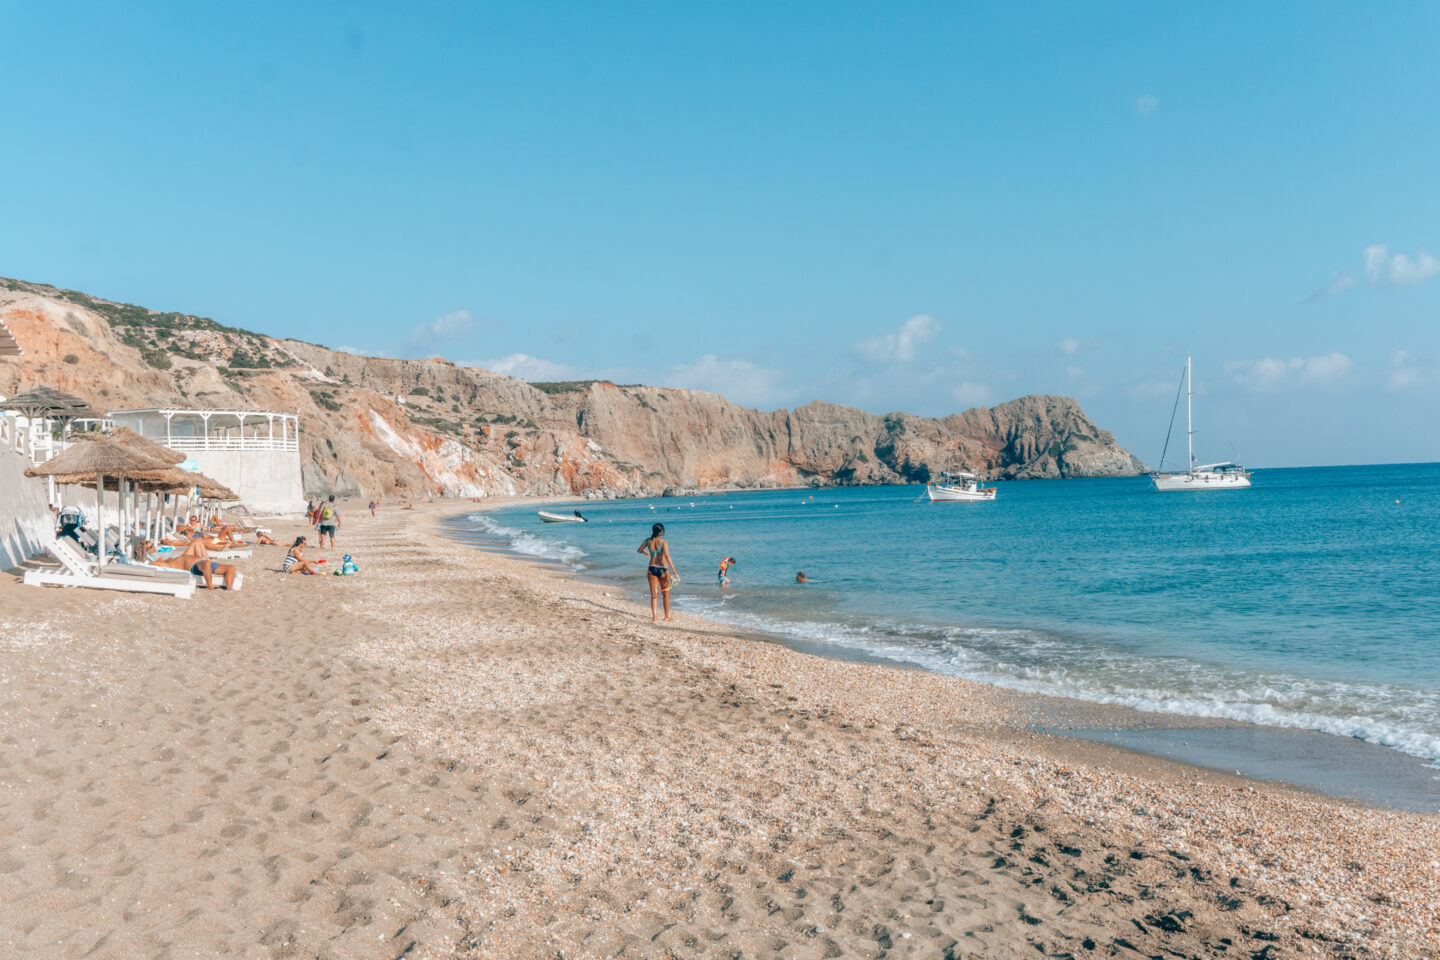 10 Days in Greece Itinerary - People relaxing, sailing and swimming at Paralia Paleochori beach on Milos Island in Greece. 